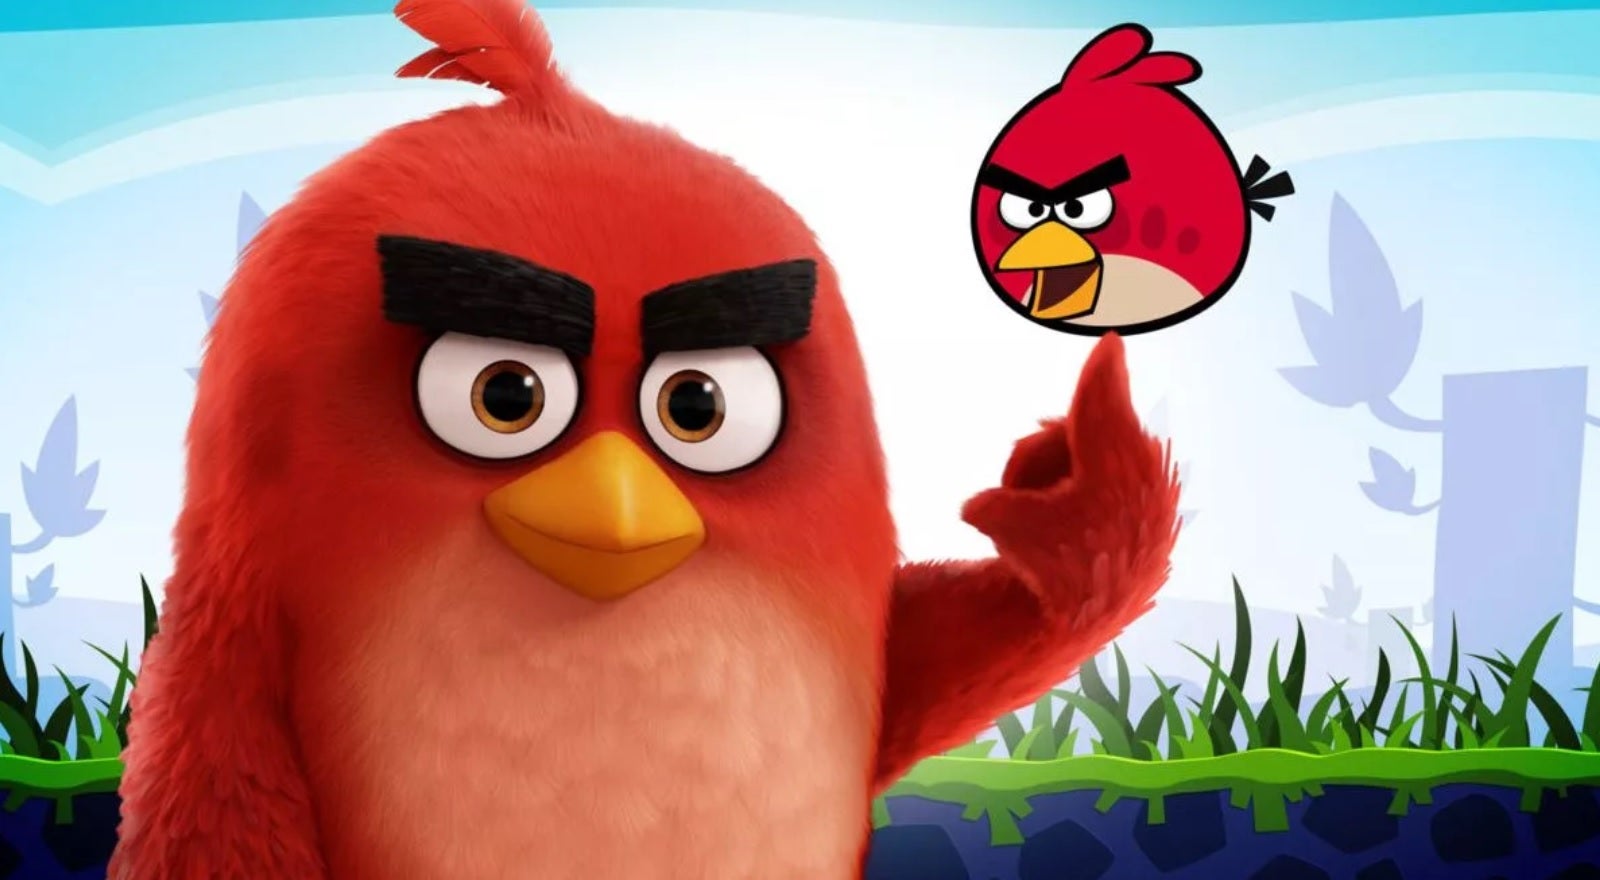 An image of the modern Angry Birds version of Red balancing the original Red on his wing/finger